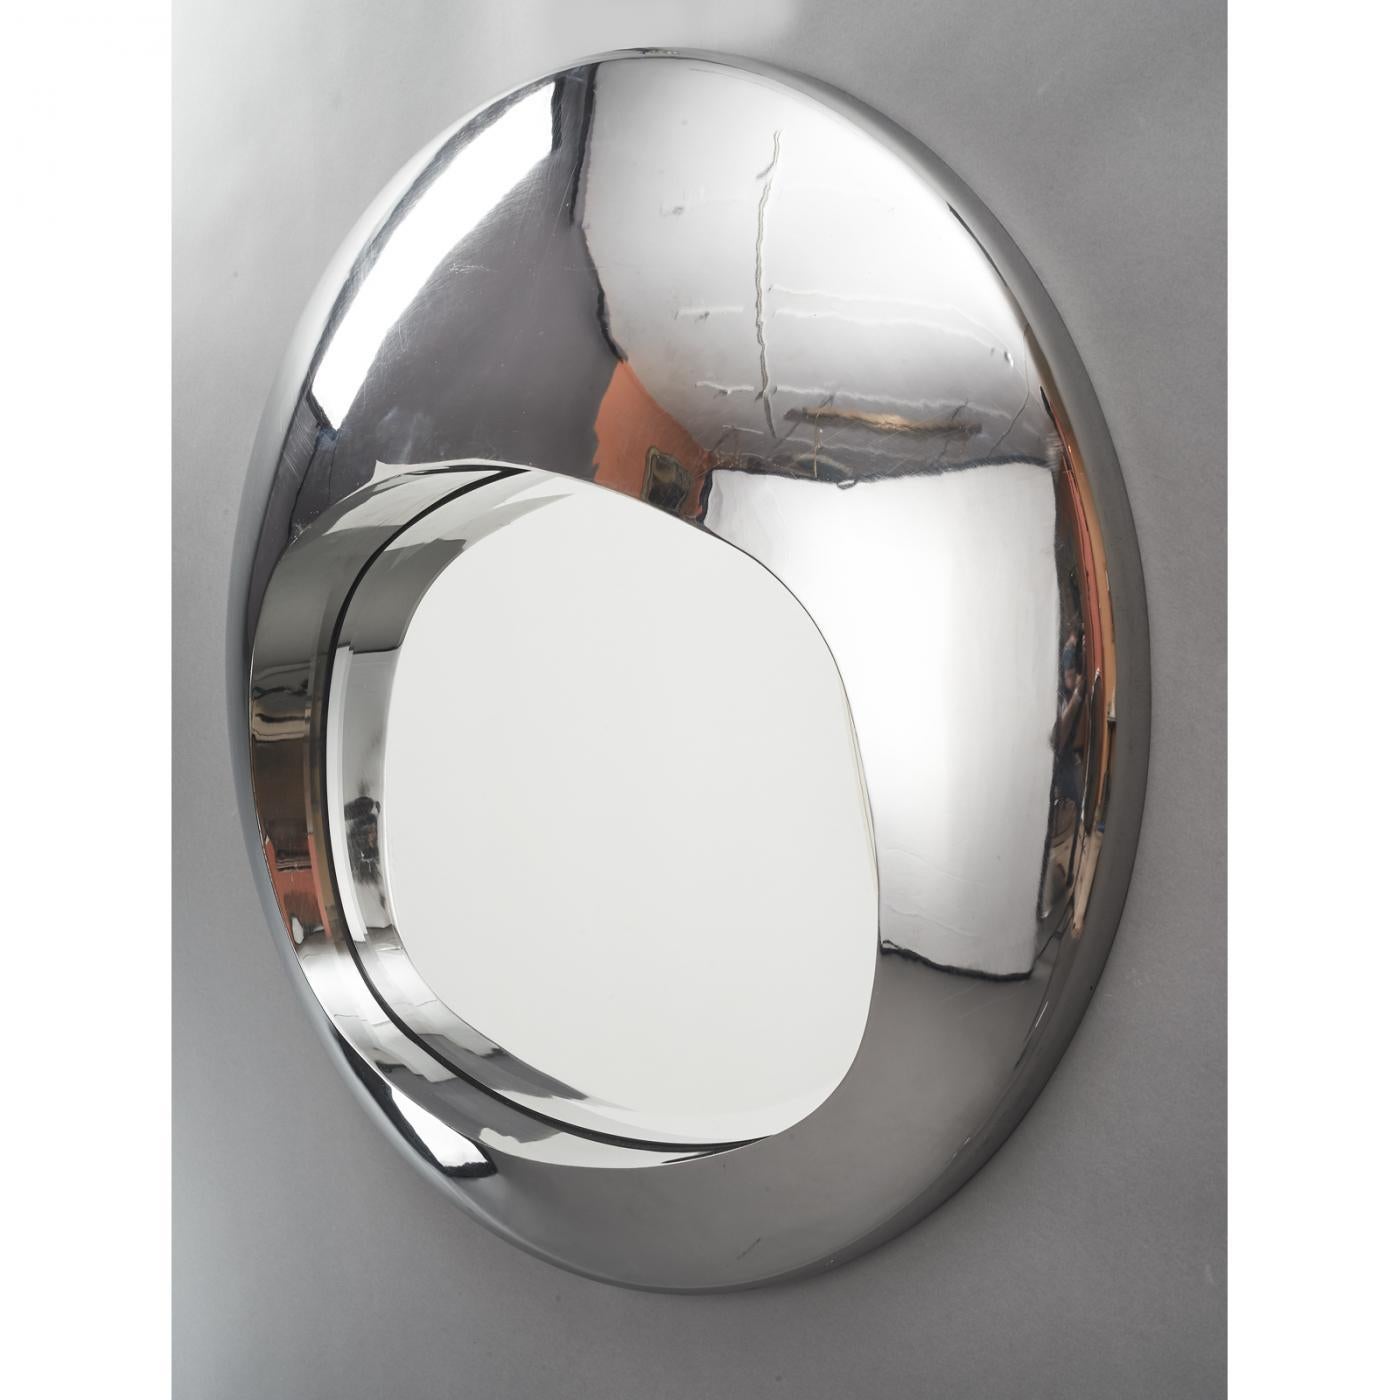 Spectacular Chromed Futuristic Mirror, France 1970's For Sale 1